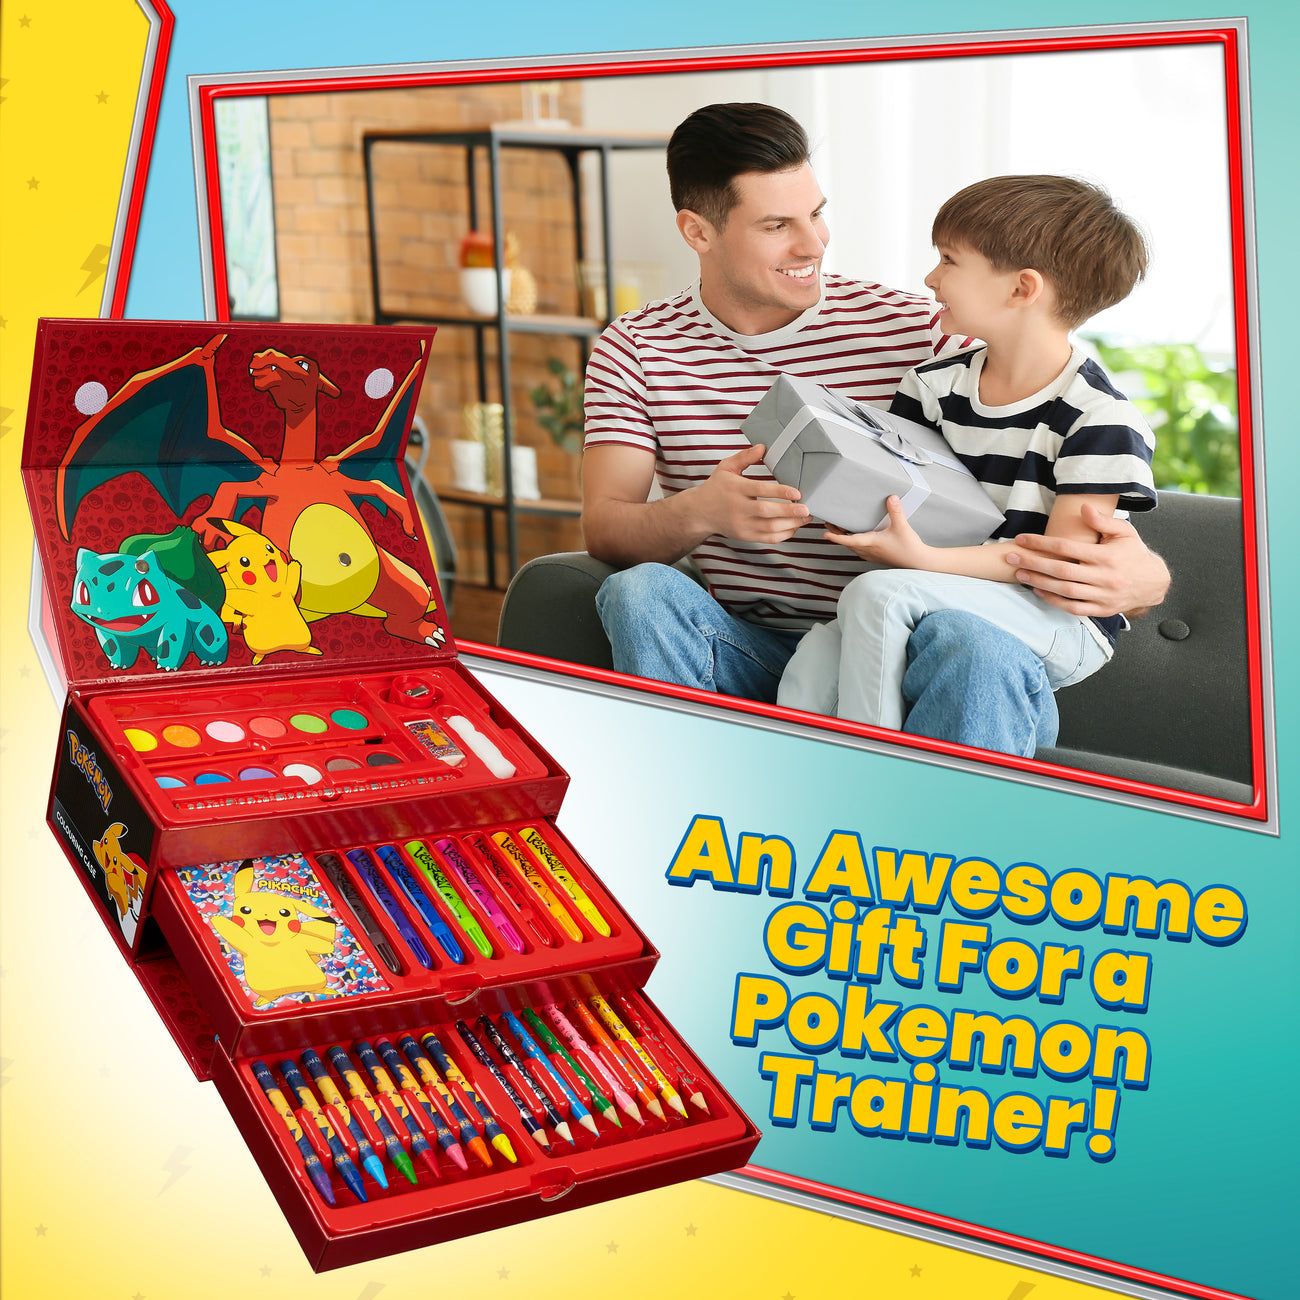  Innovative Designs Pokemon Kids Coloring Art and Sticker Set,  30 Pcs. & Craft Supplies with Pencil Case : Toys & Games